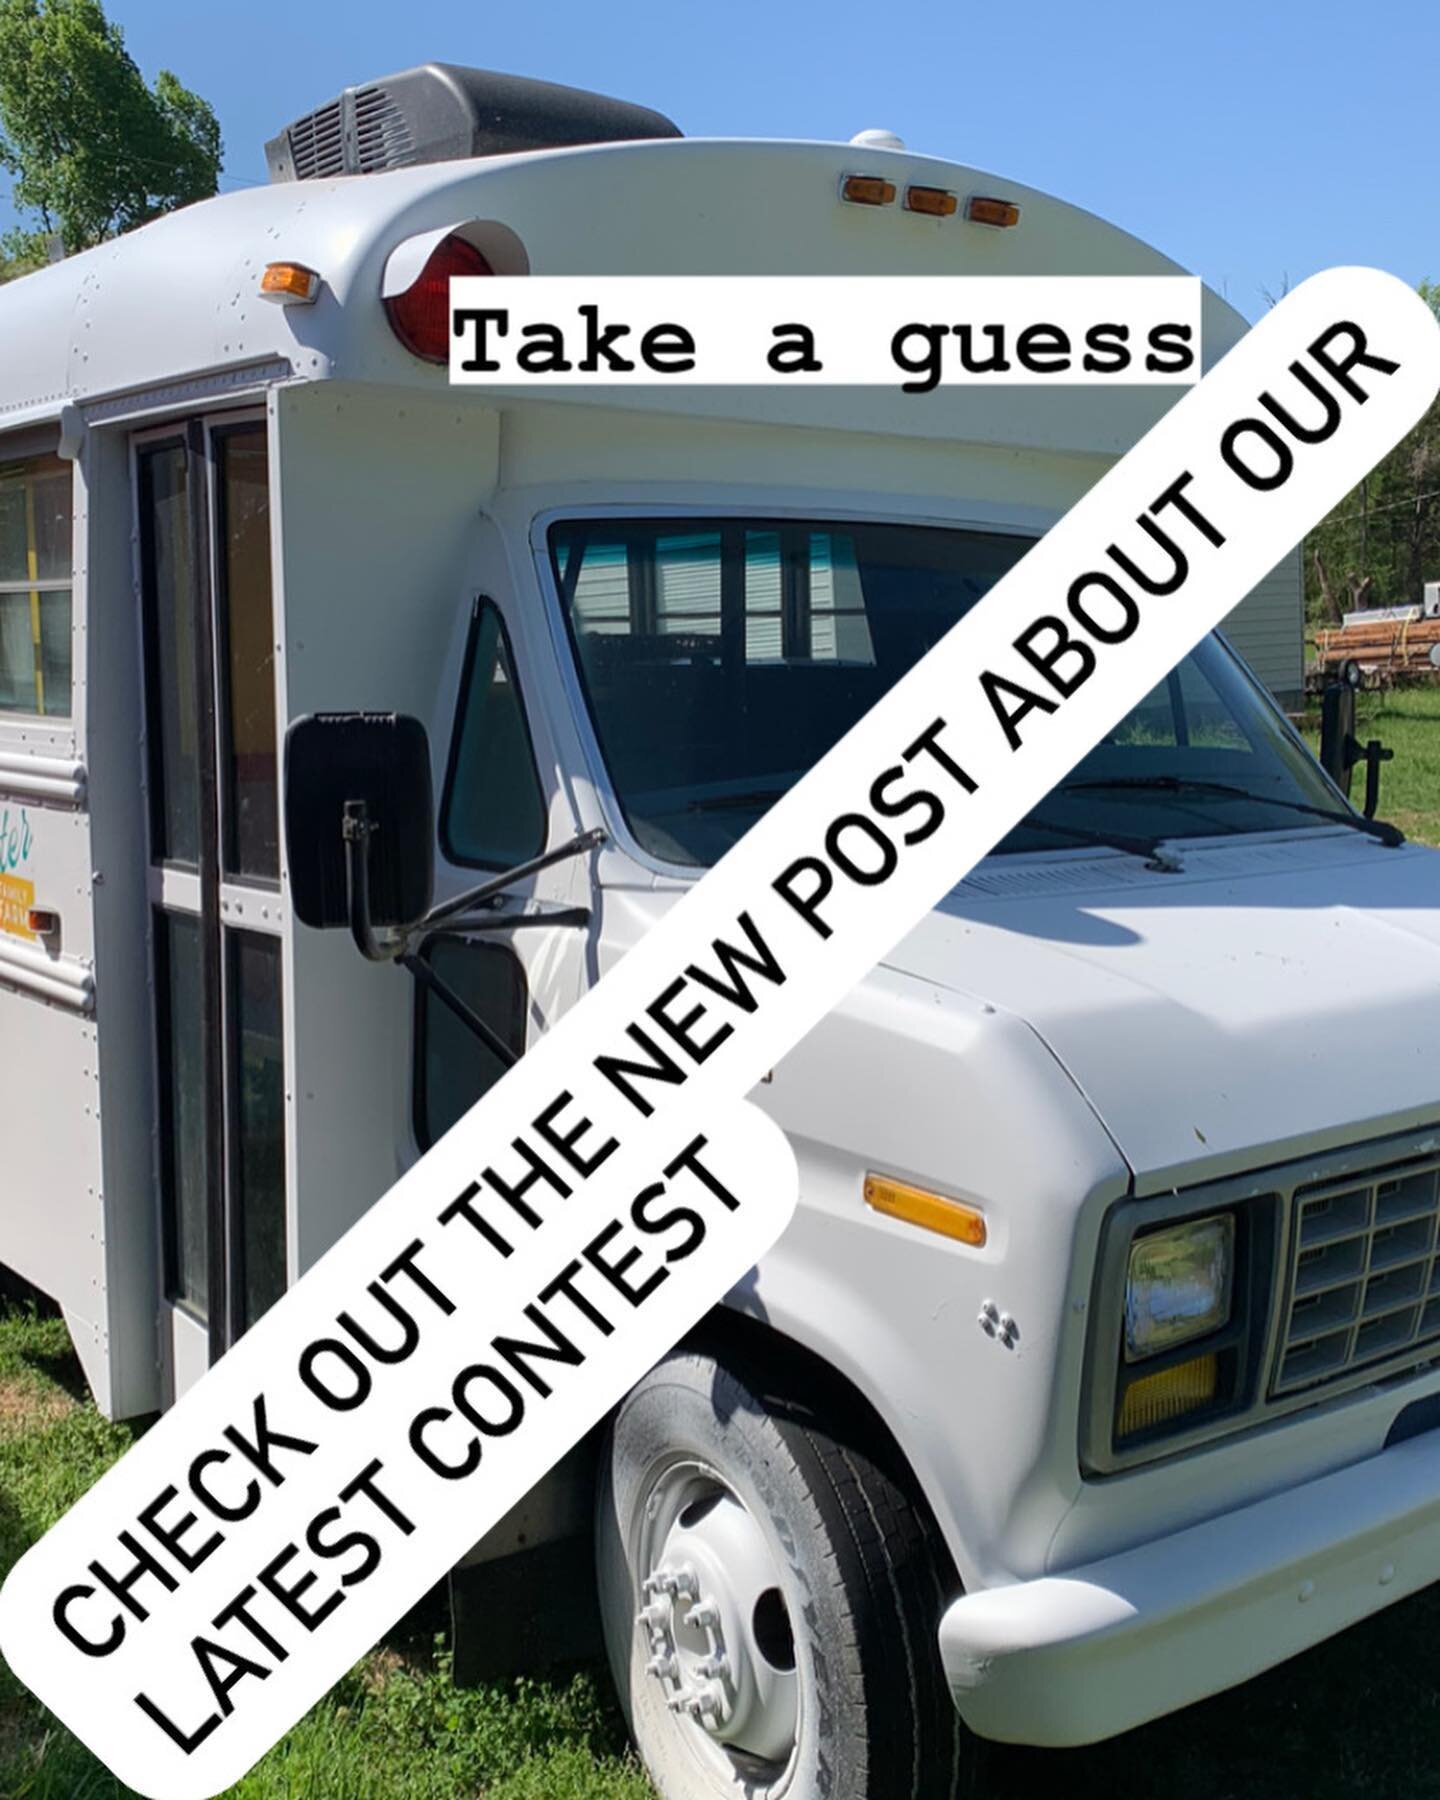 We need your help! Since the bus was such a hit at @maryvillefarmersmarket last weekend, we have decided we need to come up with a catchy name. So we@would@love for all of your input on what to name her. The winning name will go under the logo on the